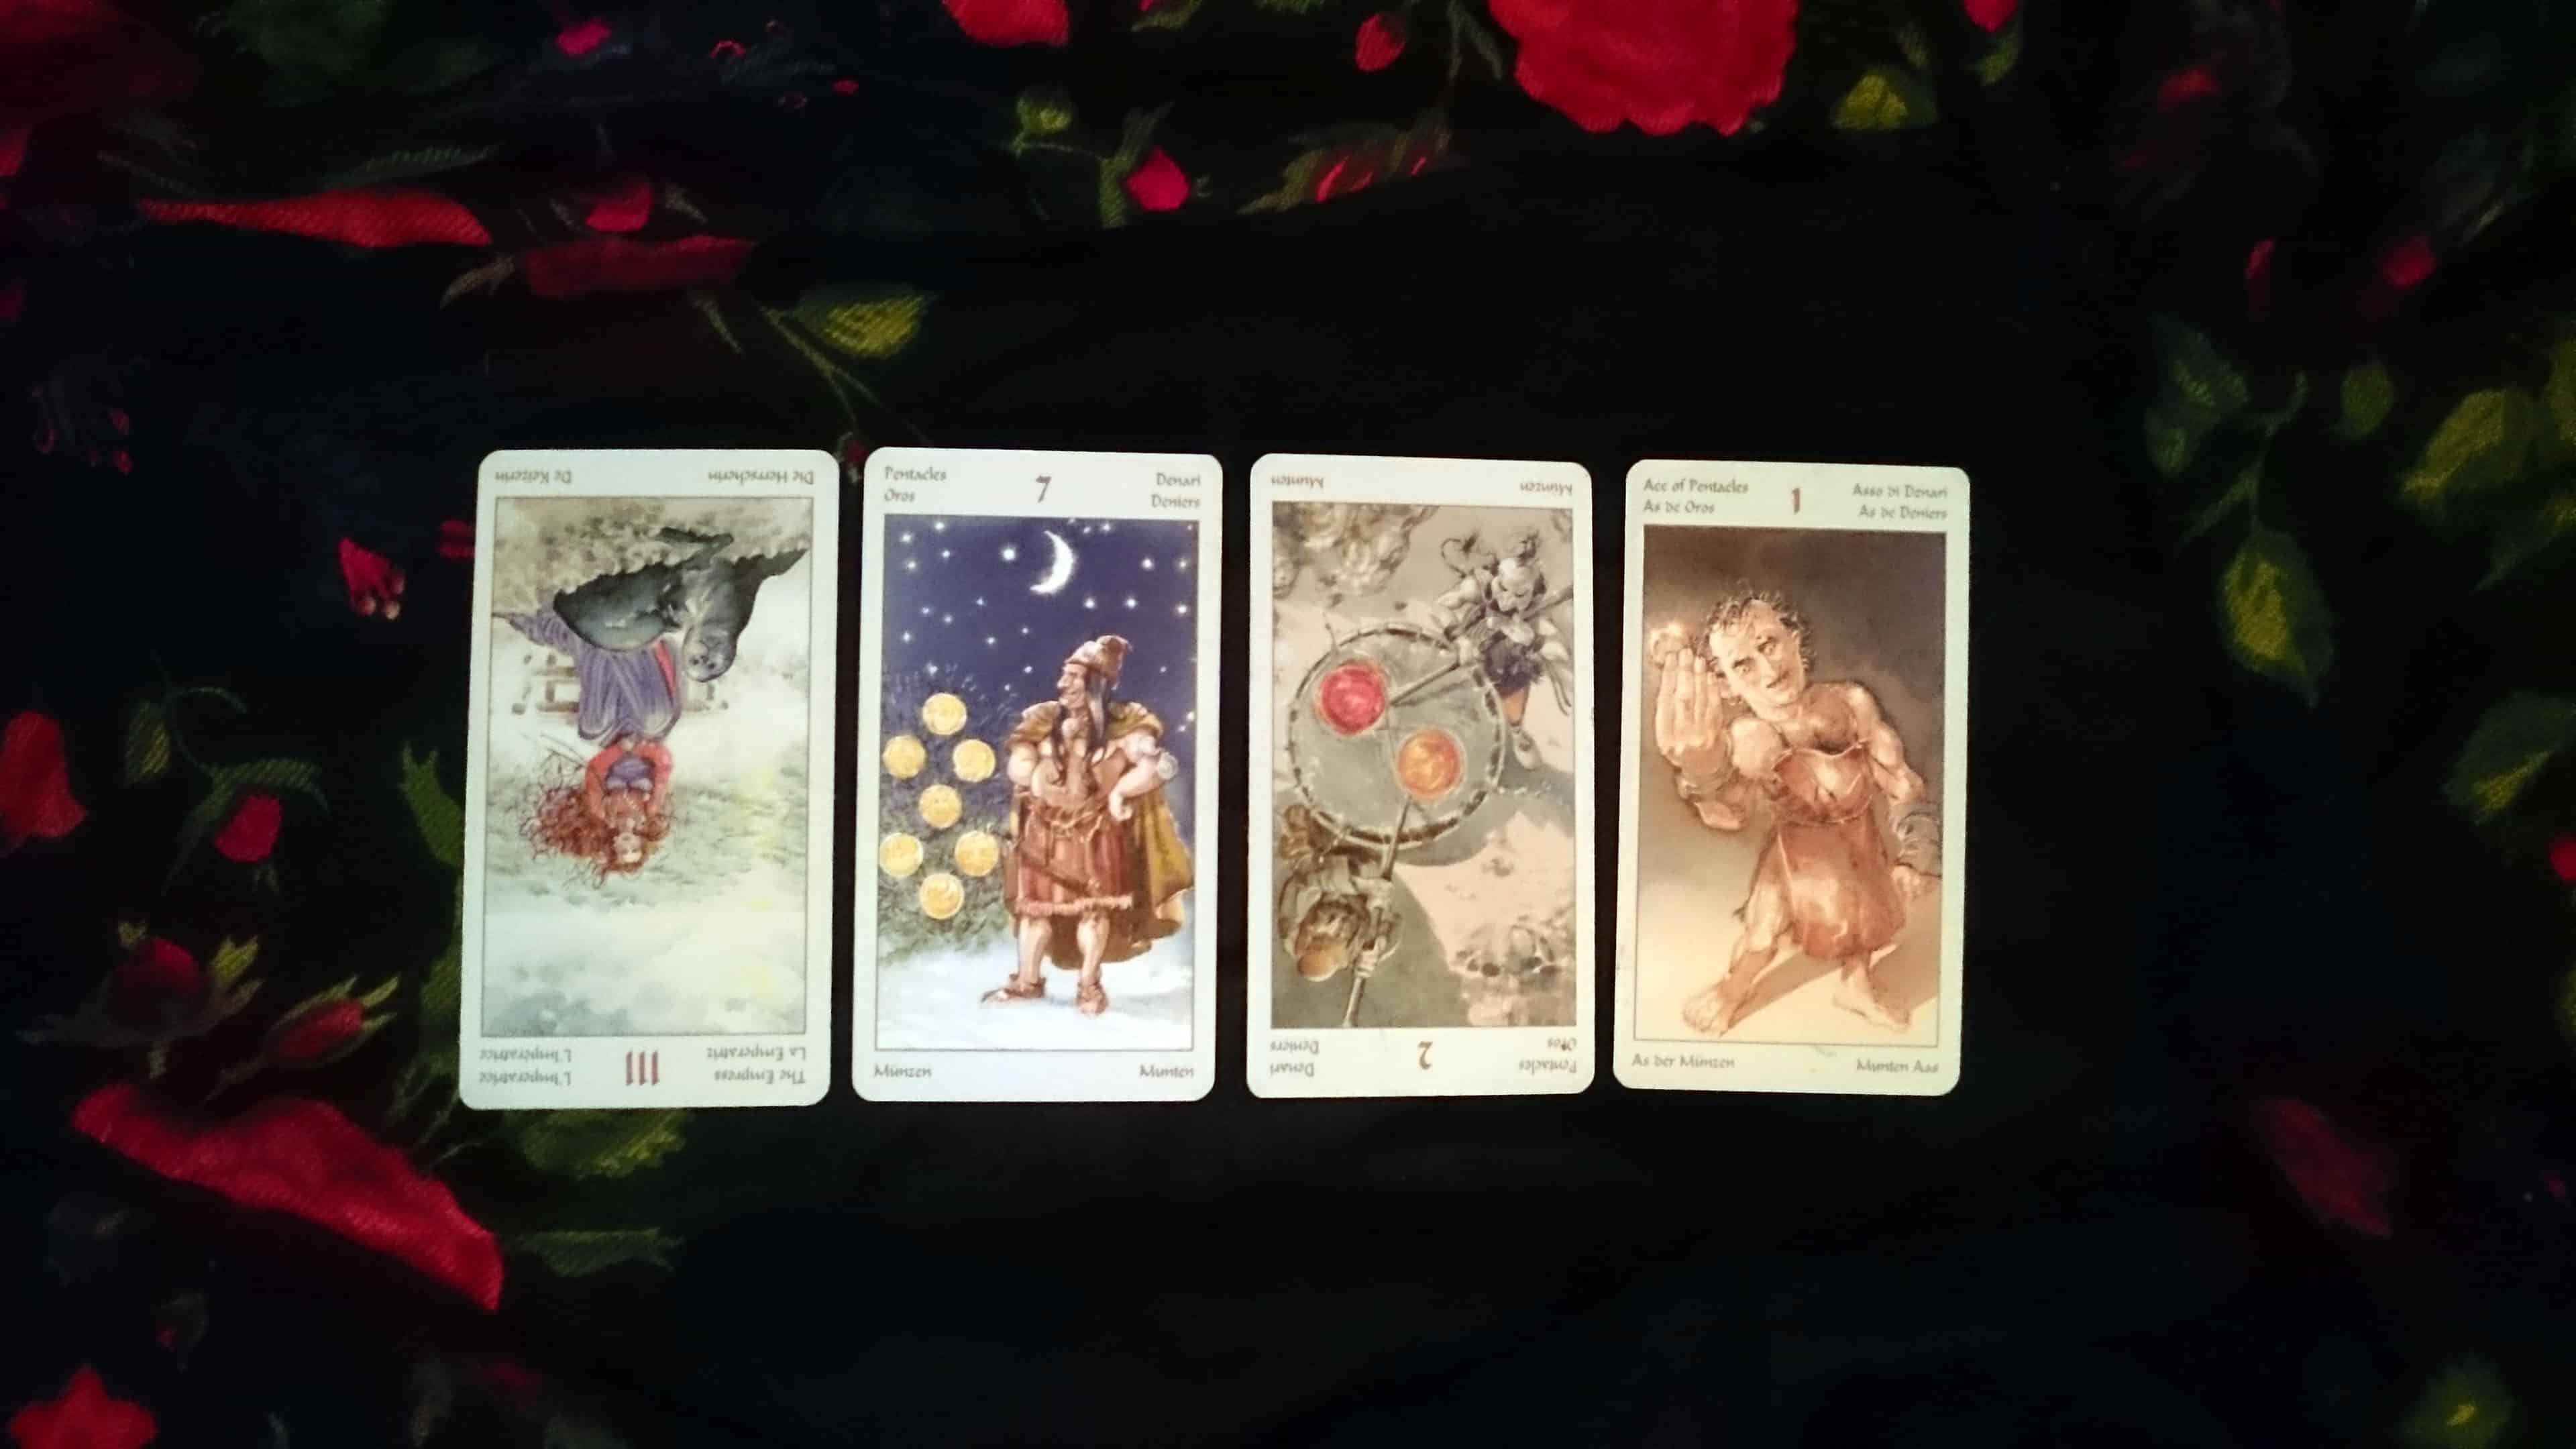 Your new entrepreneurial year according to Tarot